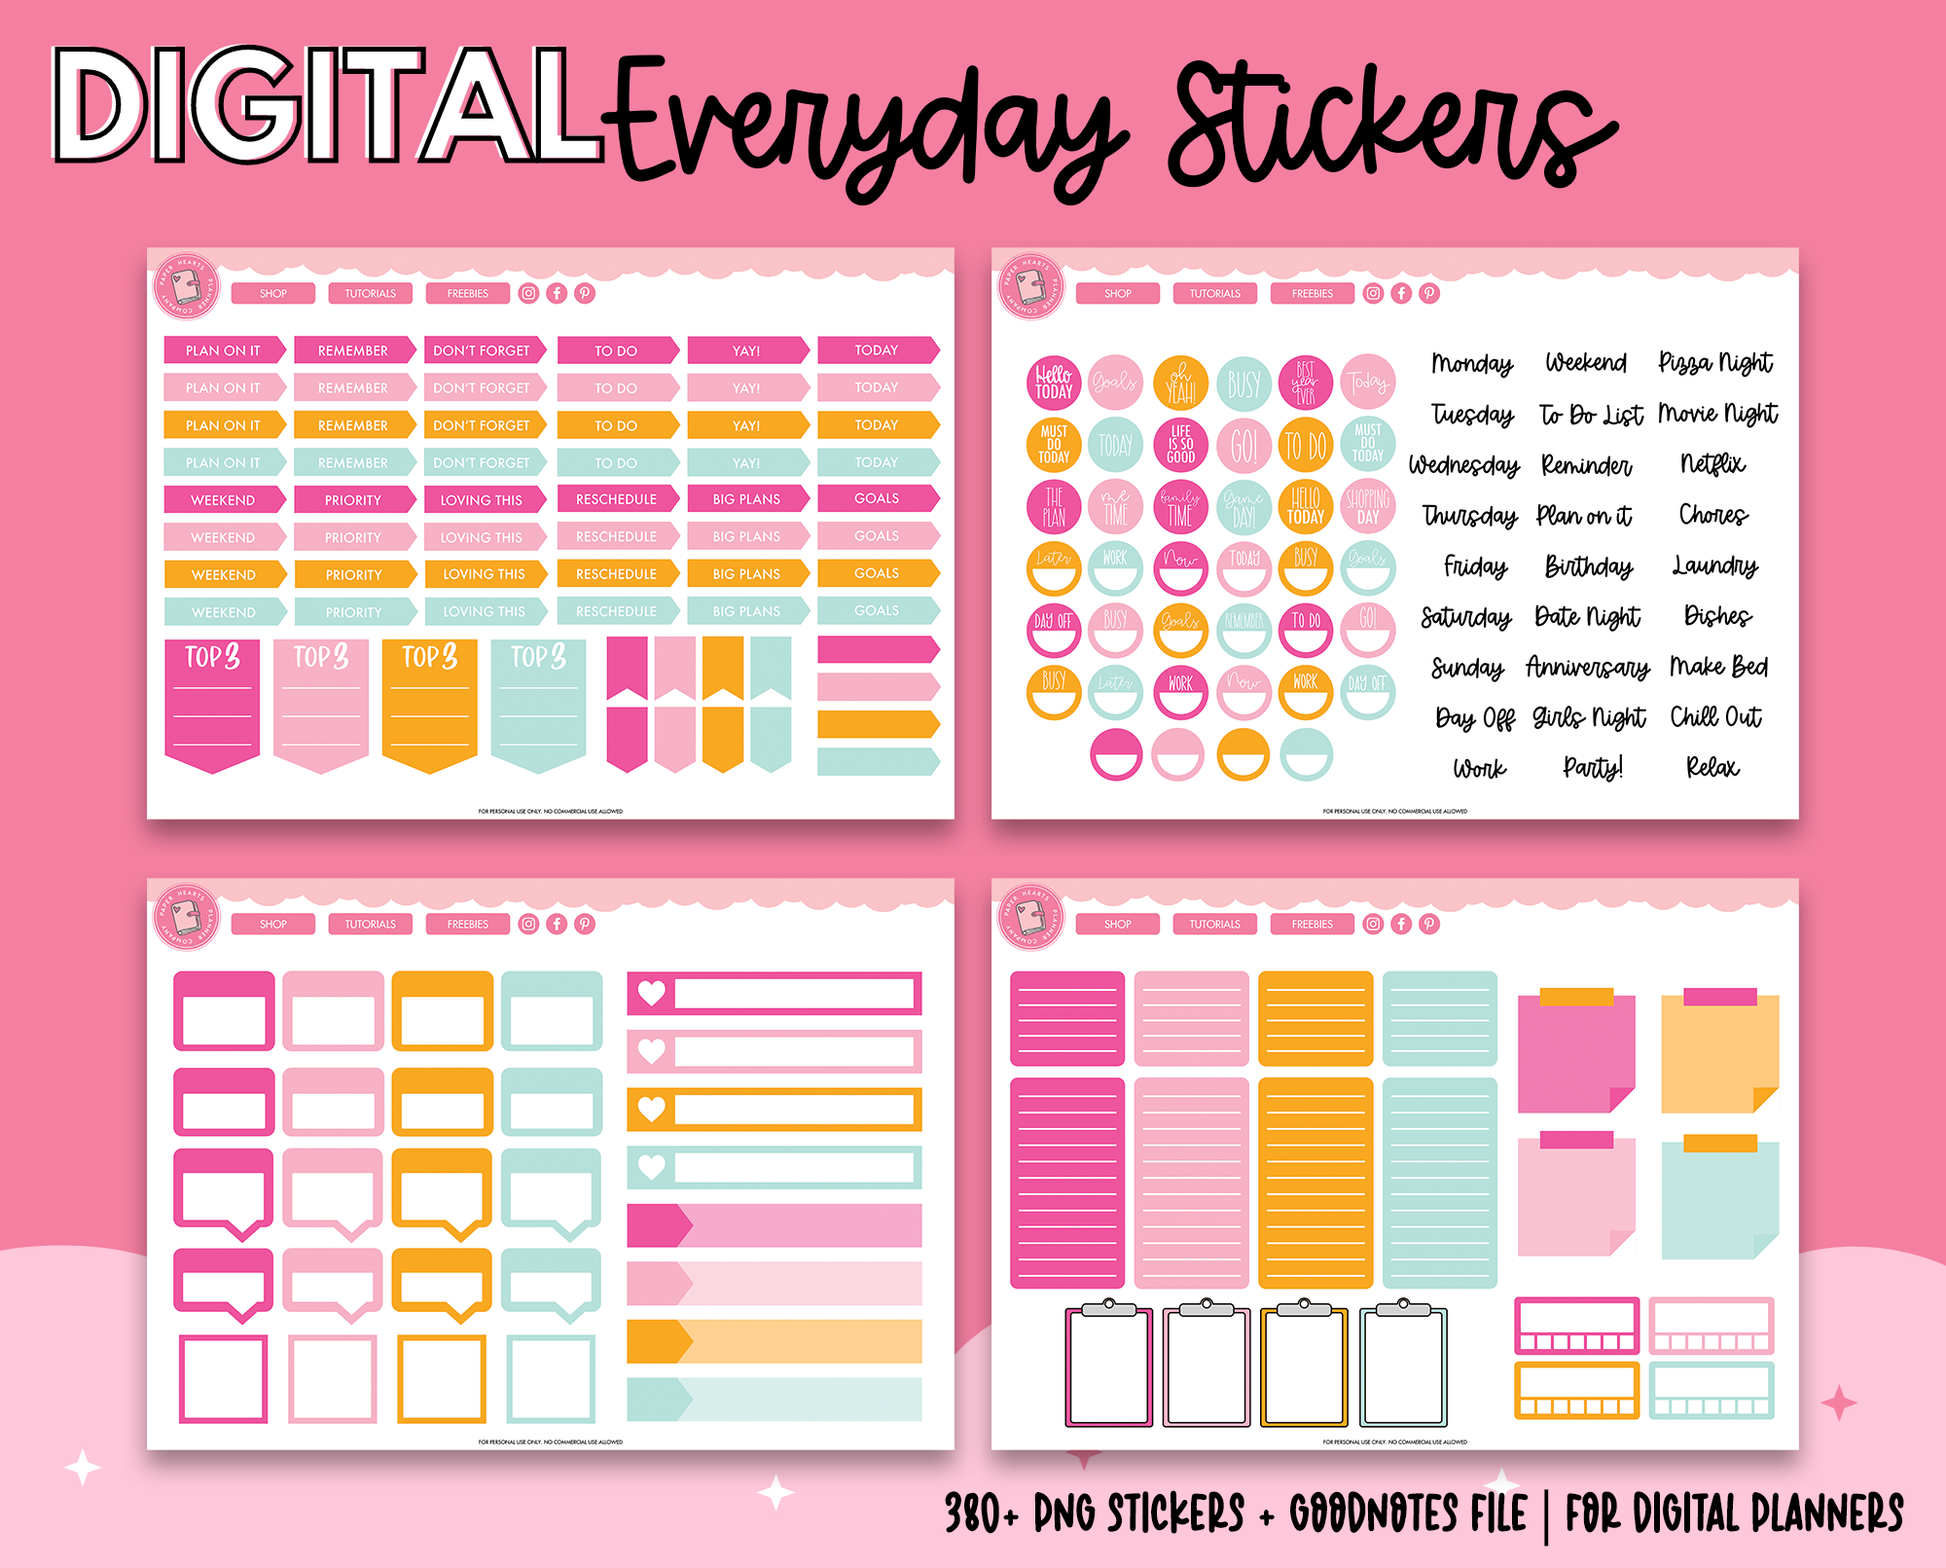 A5 Sticker Pack - Colorblends. 2 Foiled Sticker Sheets, 111 Total Stickers.  Fun and Function Designs to Optimize Life Planner Organization by Erin